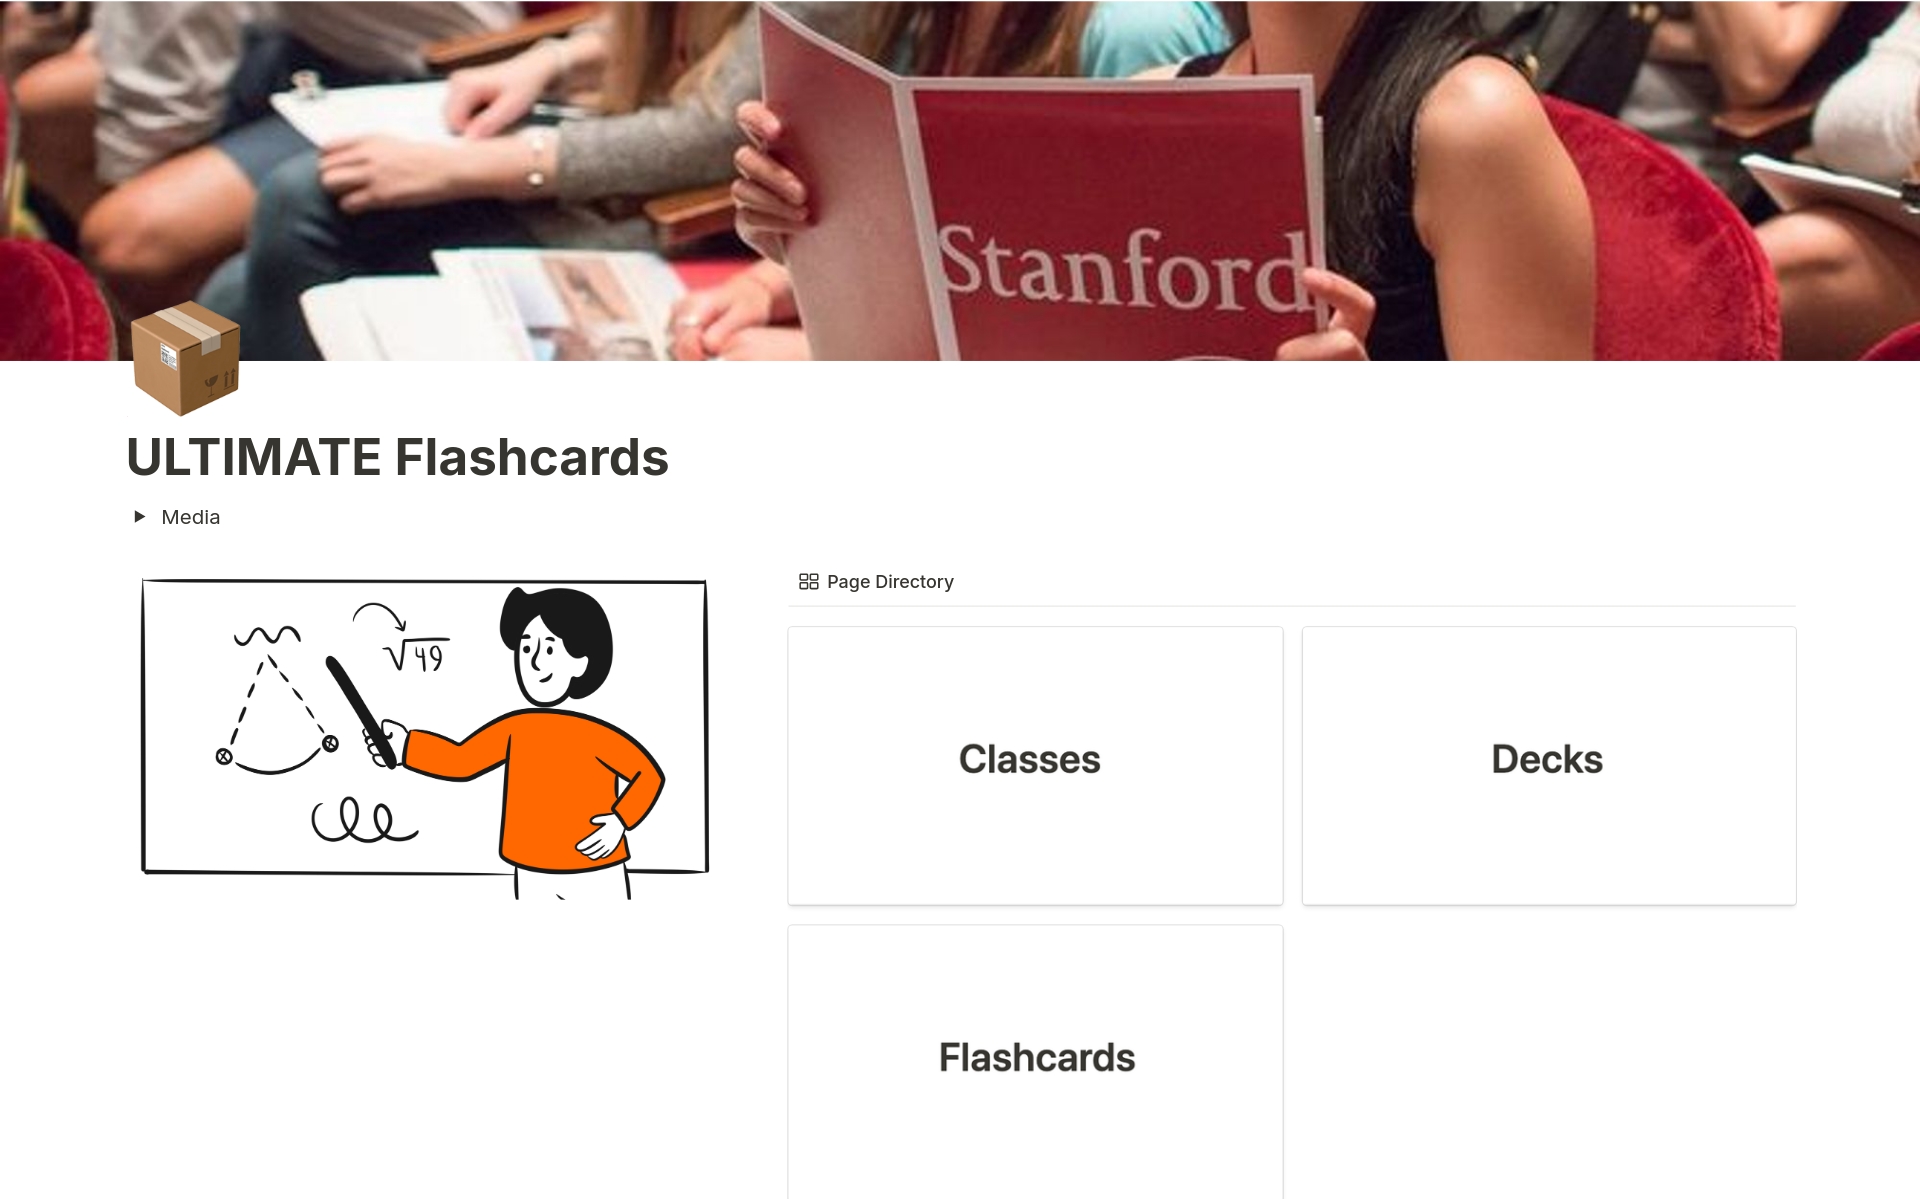 Master new concepts, enhance your learning, and boost your memory retention with the Ultimate Flashcards Notion template. Designed to streamline the process of creating, organizing, and studying flashcards, this comprehensive tool empowers learners of all levels to study smarter 